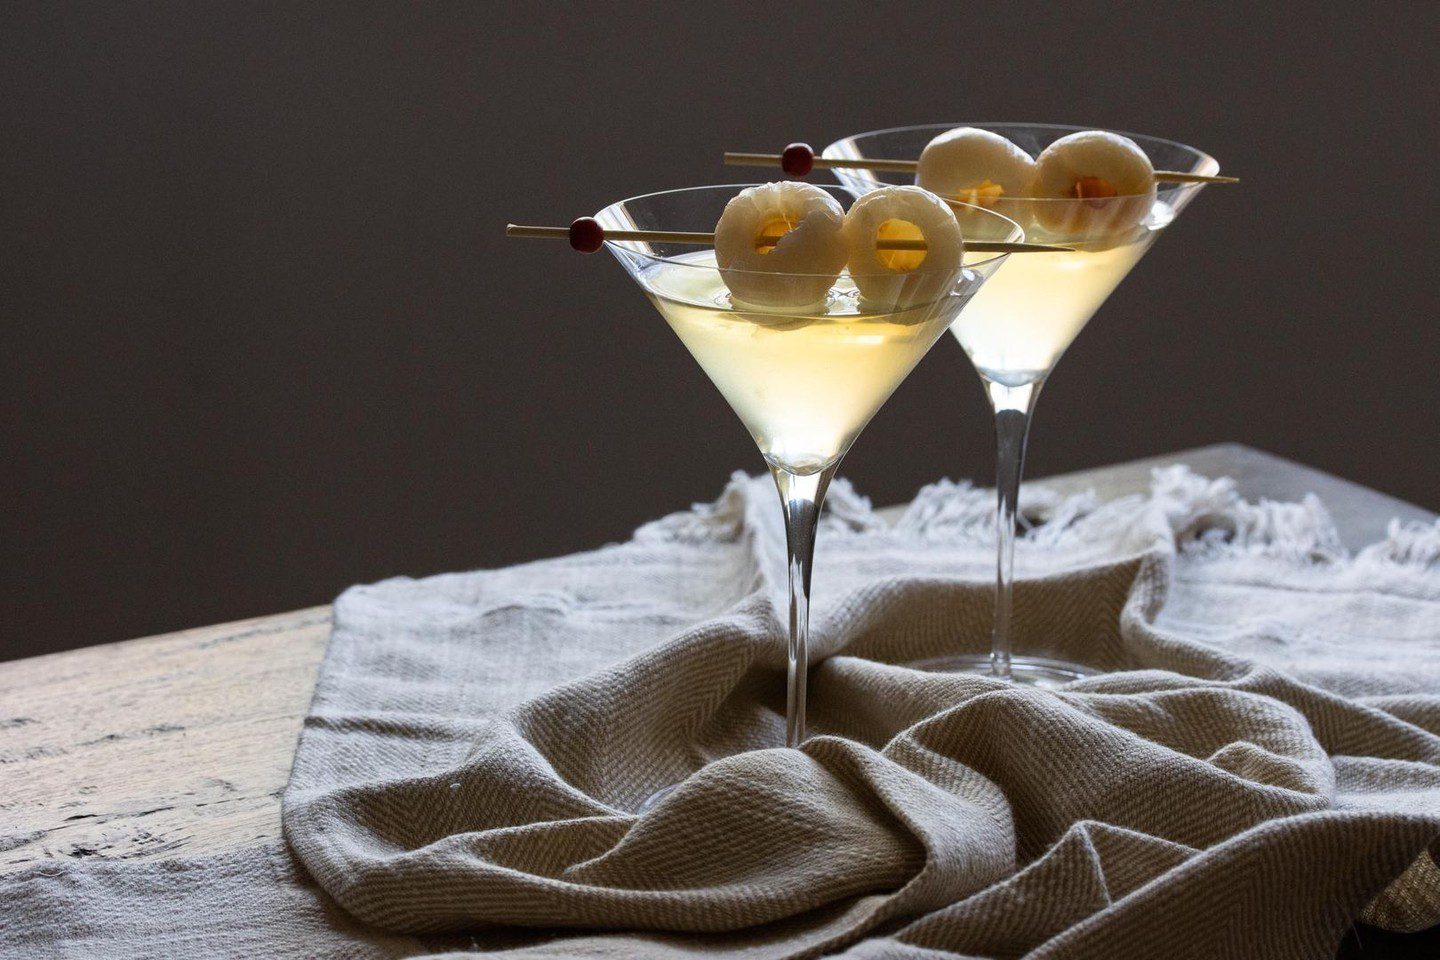 LYCHEE MARTINI
🍸
Lychee Martini, so yummy! Strange to use the term yummy for a martini, however, once you try this recipe, I know you will mutter the same words.
🍸
Cheers!!

Grab the below link or visit profile bio
https://bit.ly/3p5gCcy
🍸
🍸
🍸
🍸
🍸
🍸

#tastethisnext #igfoodies #foodgrams #foodstragram #yummyfoods #foodgrammer #foodstyleguide #instayummy #instaeating #foodgramers #foodgrammers #foodstyles #foodstyler #instafoodiee #eattheworldtour #giangiskitchen #feedyoursoul #todayfood #feedfeed #huffposttaste #foodgawker #foodblogfeed  #instafoodie #ilovefood #dinnerrecipe #buzzfeast #foodstyling #azfoodporn #azblooger #azfoodblogger